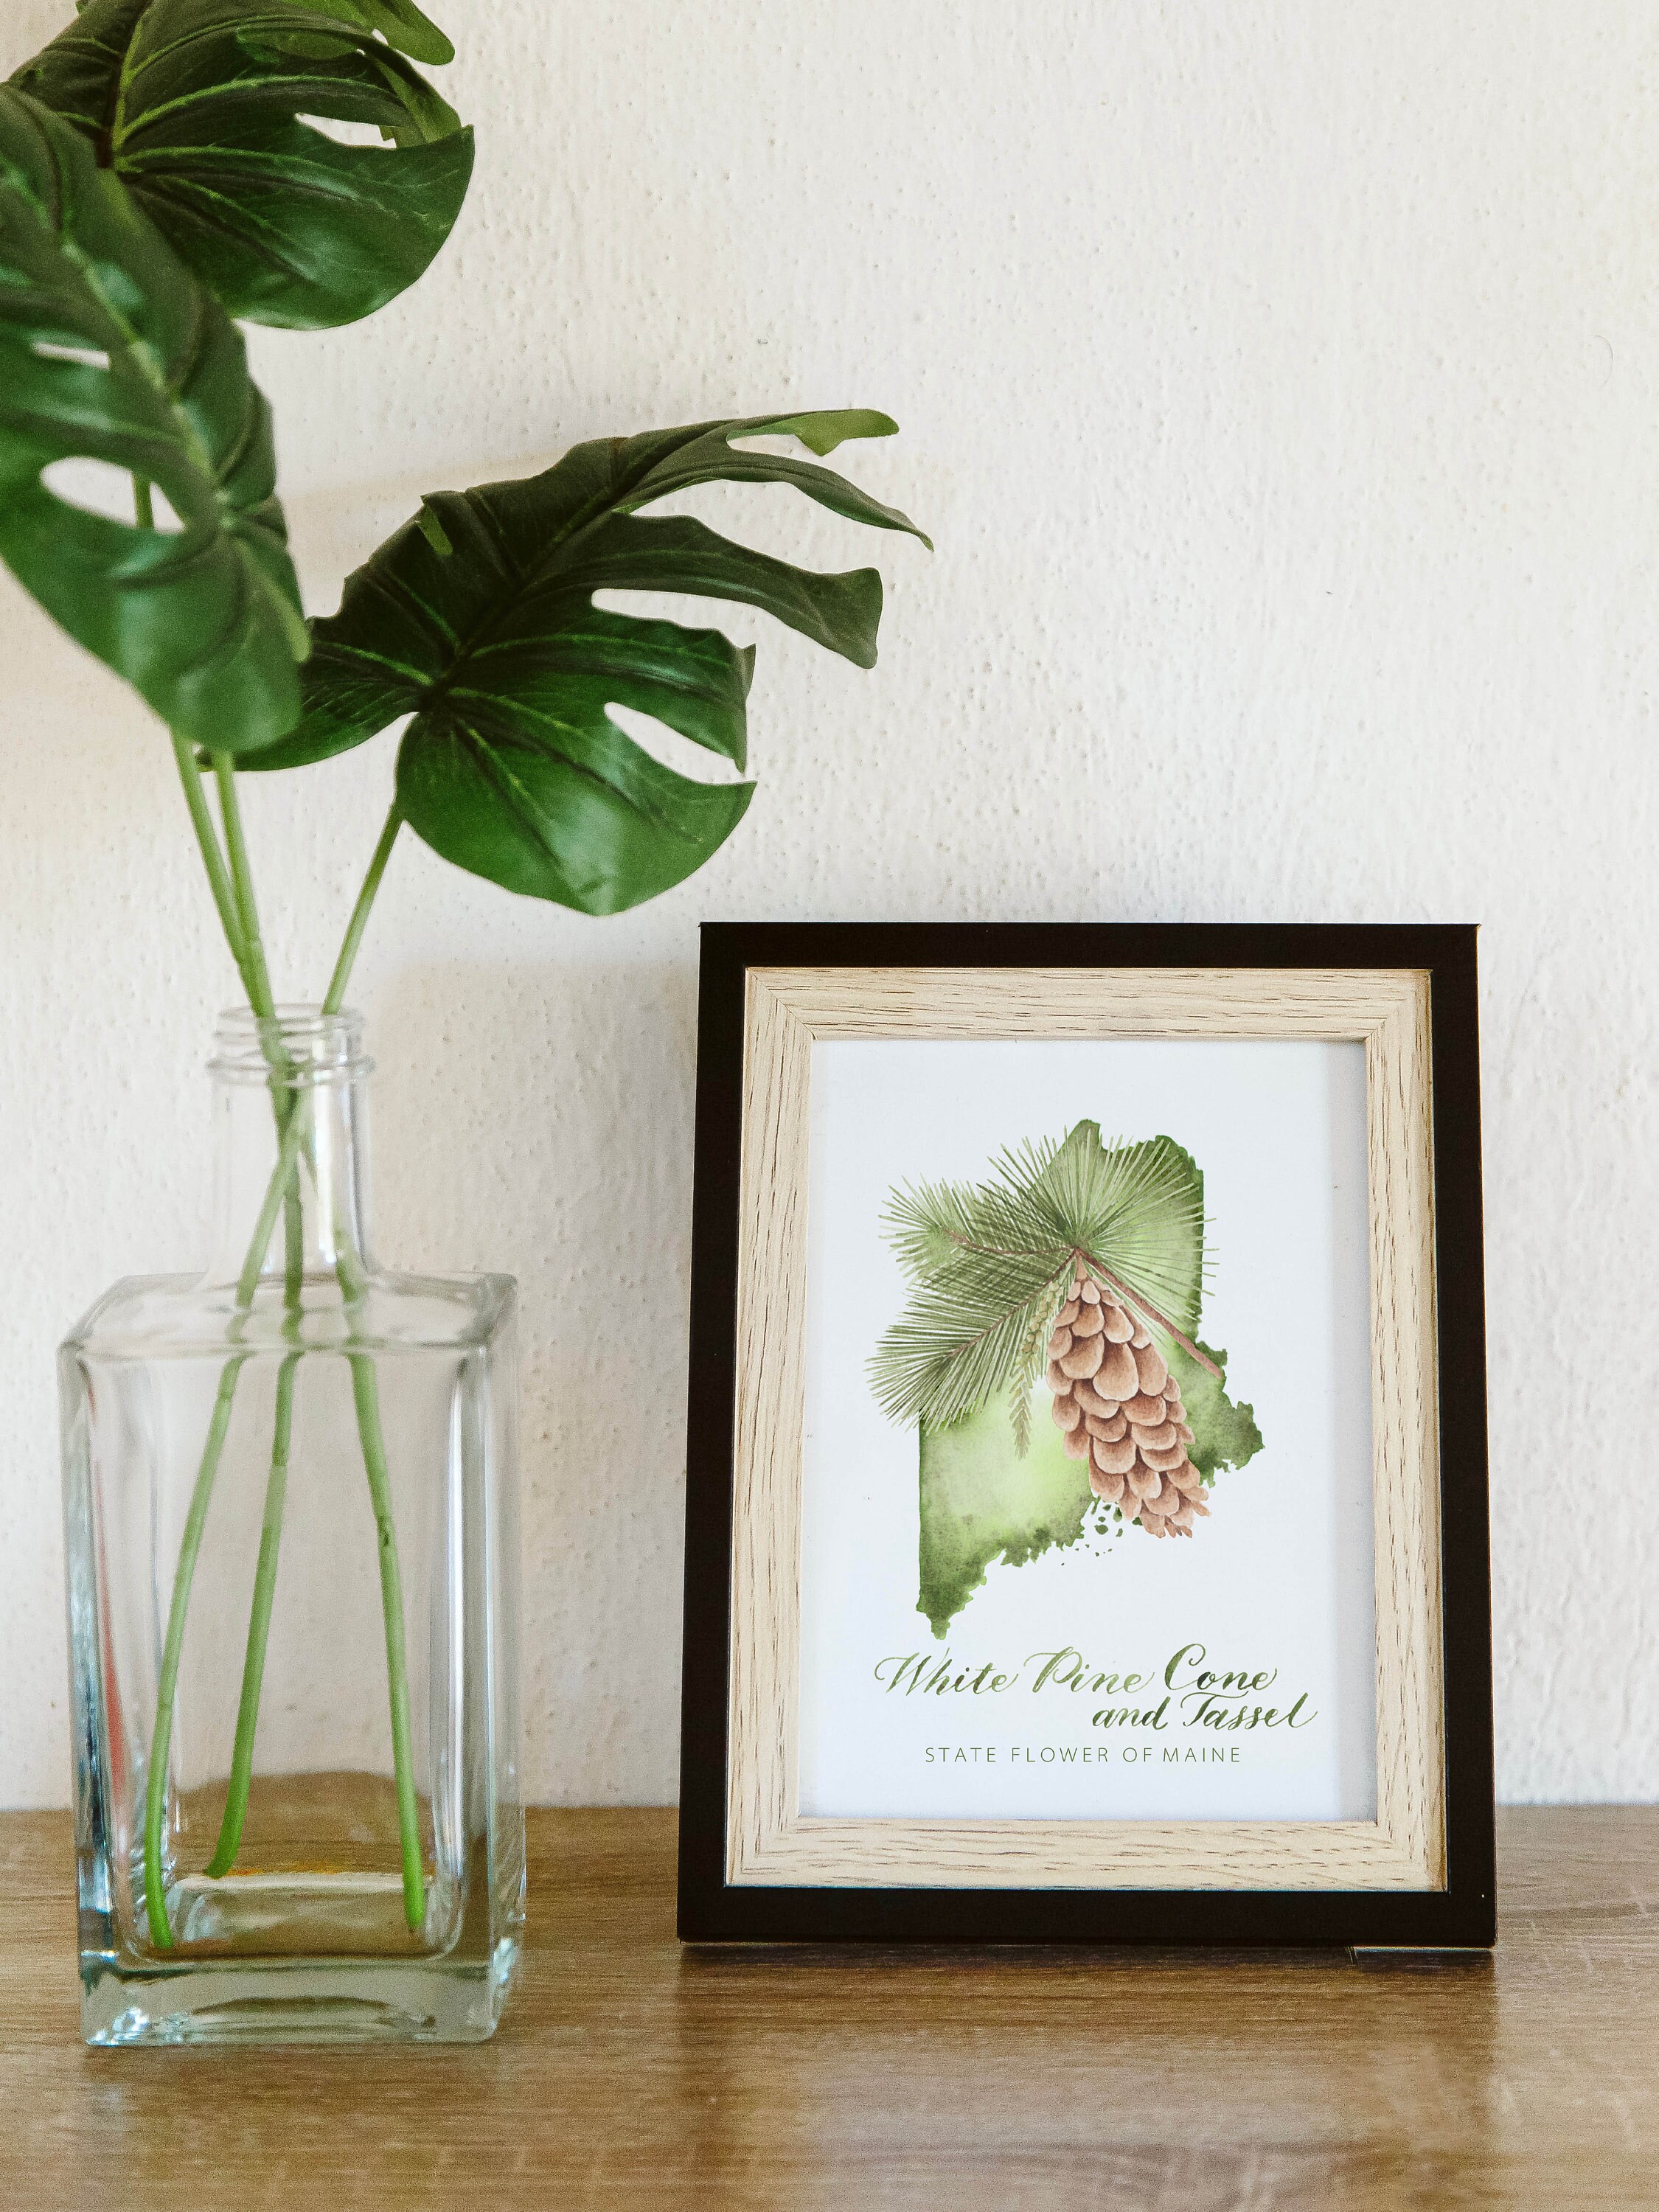 Maine state flower and shape print white pine cone and tassel fine art watercolor print